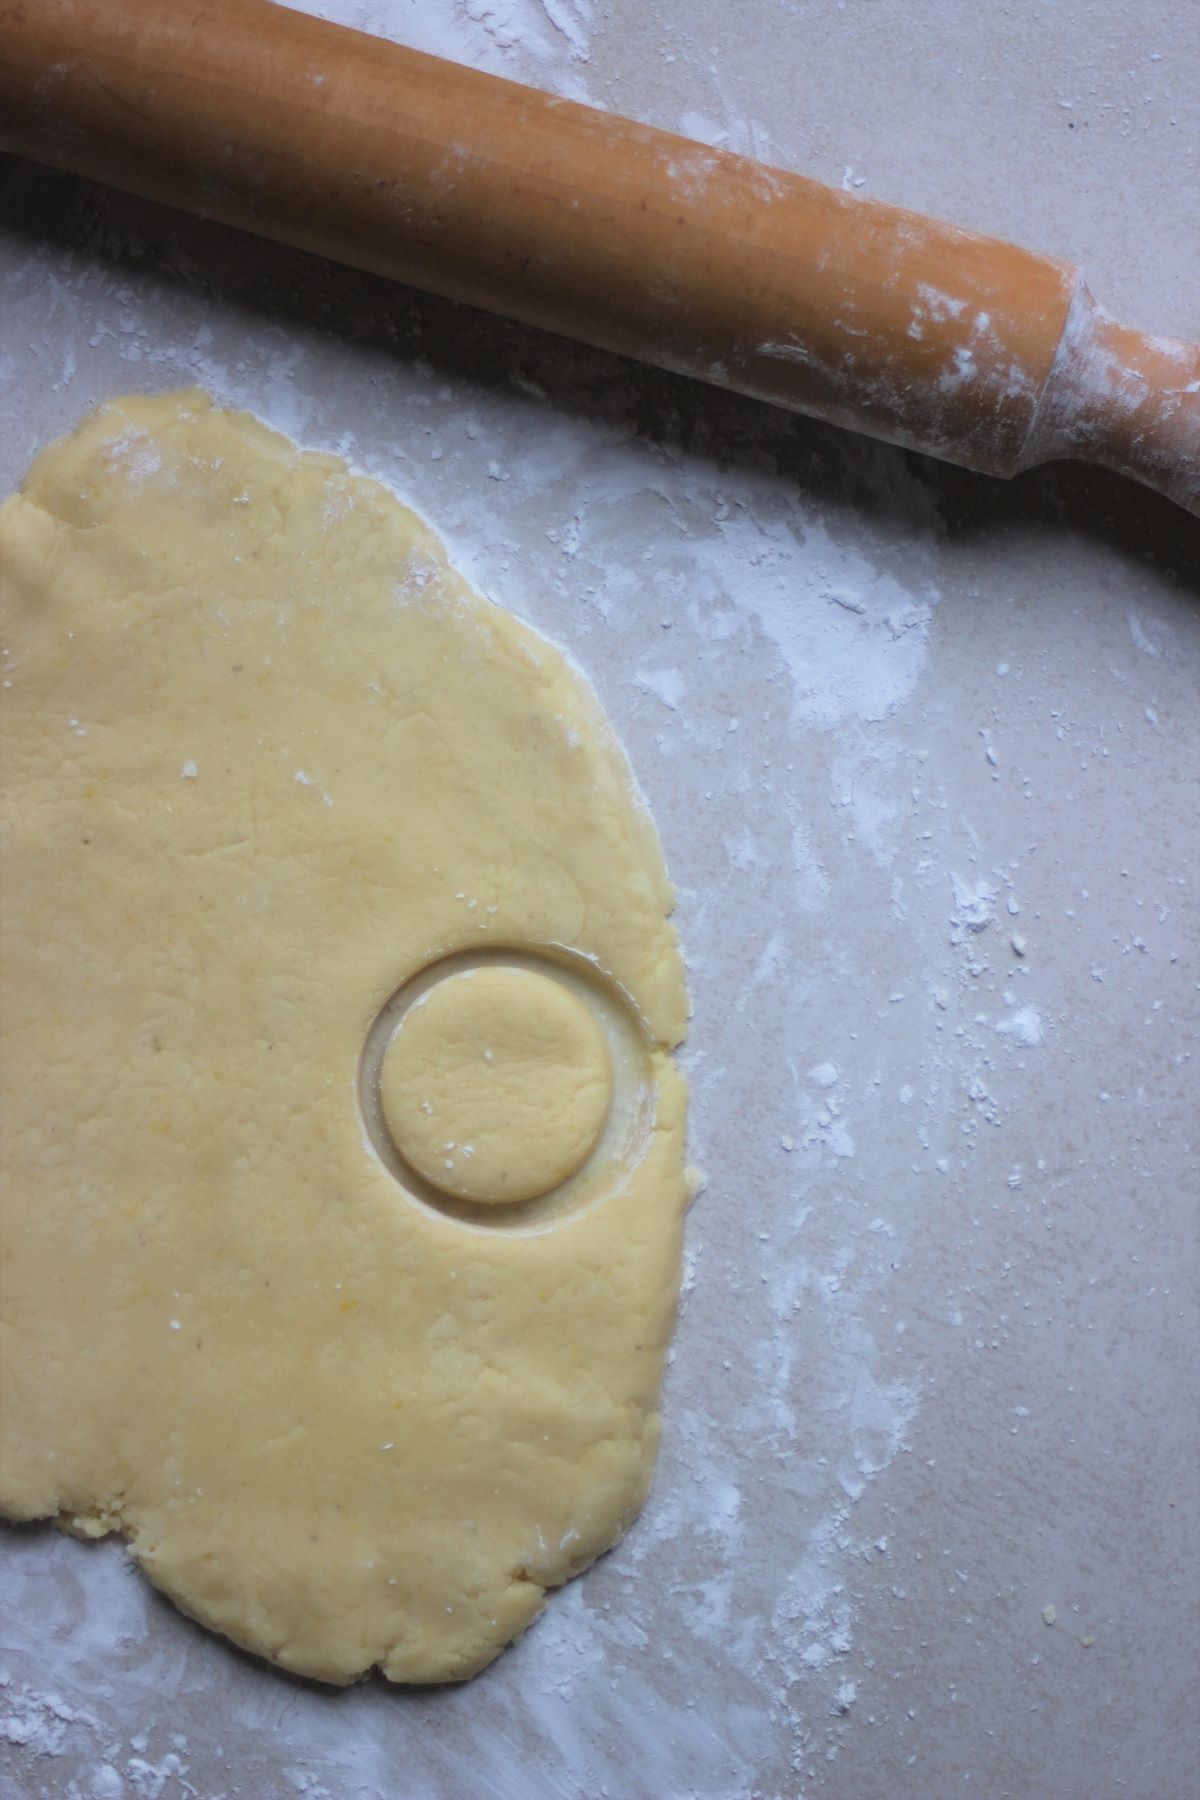 A stretched dough on a white surface with a cut roundel and a rolling pin.